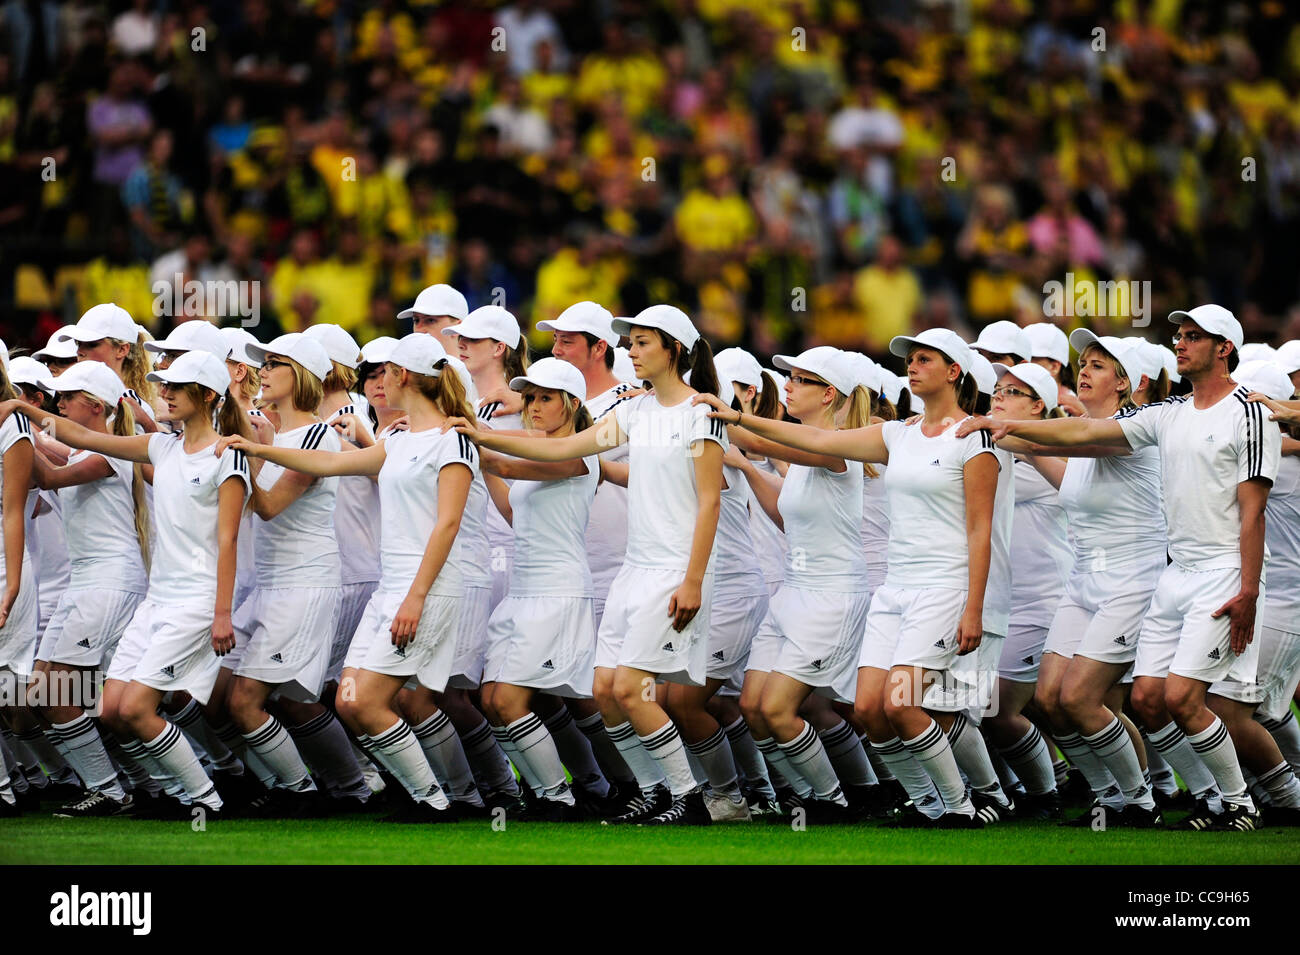 group of teenagers dressed in white during pe-match show of football match Stock Photo